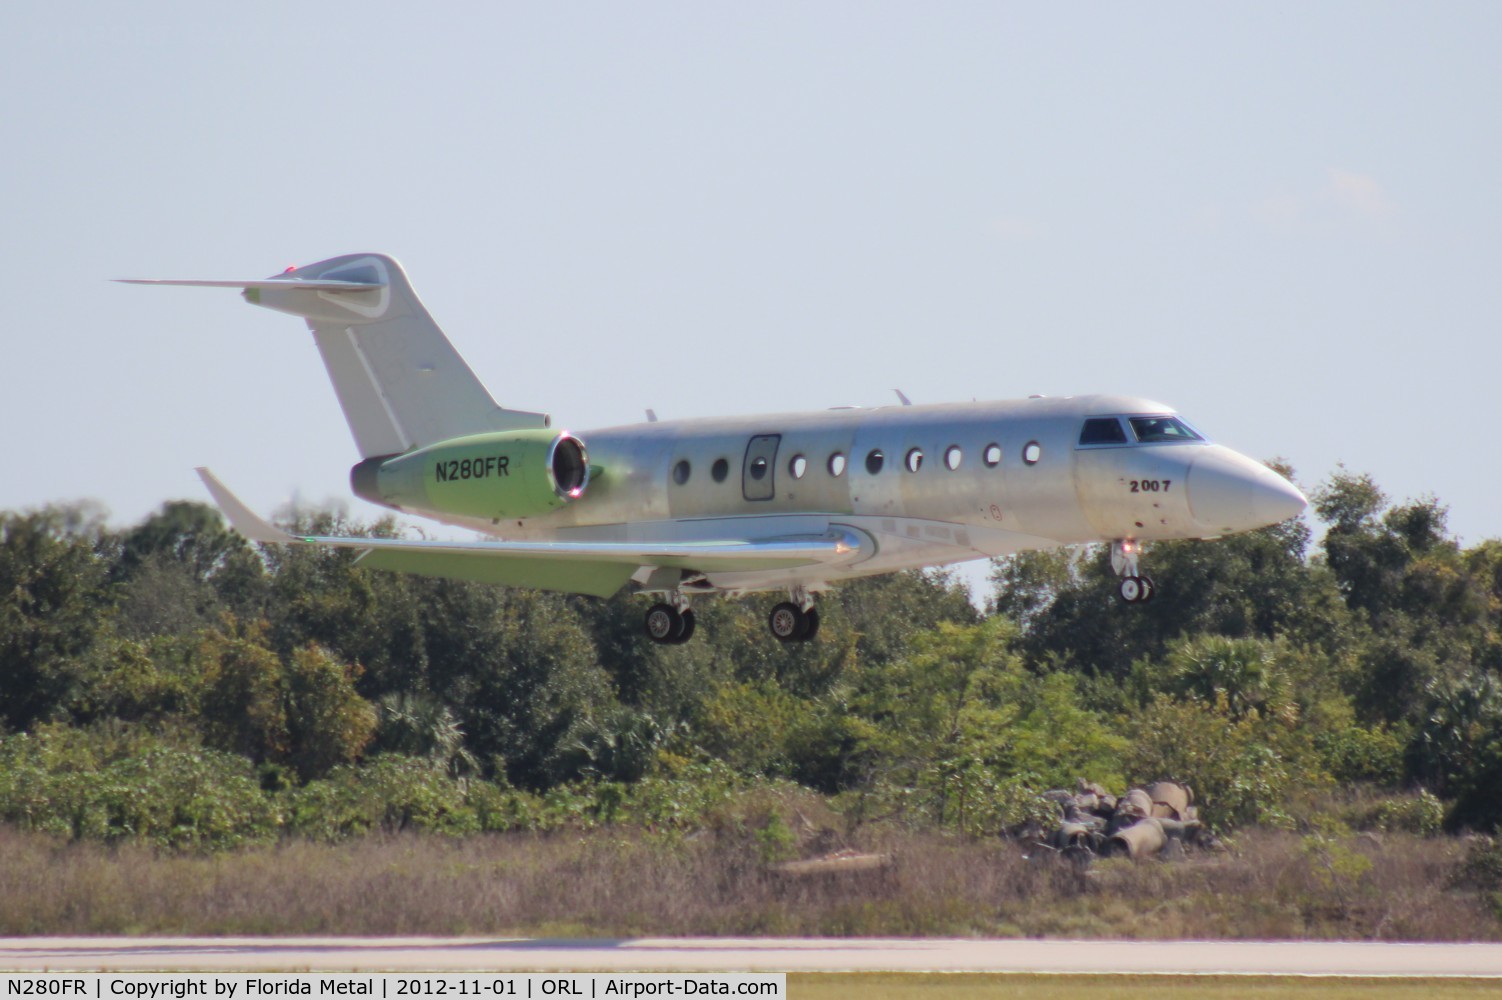 N280FR, 2012 Israel Aircraft Industries Gulfstream G280 C/N 2007, Unpainted new G280 returning from time trials